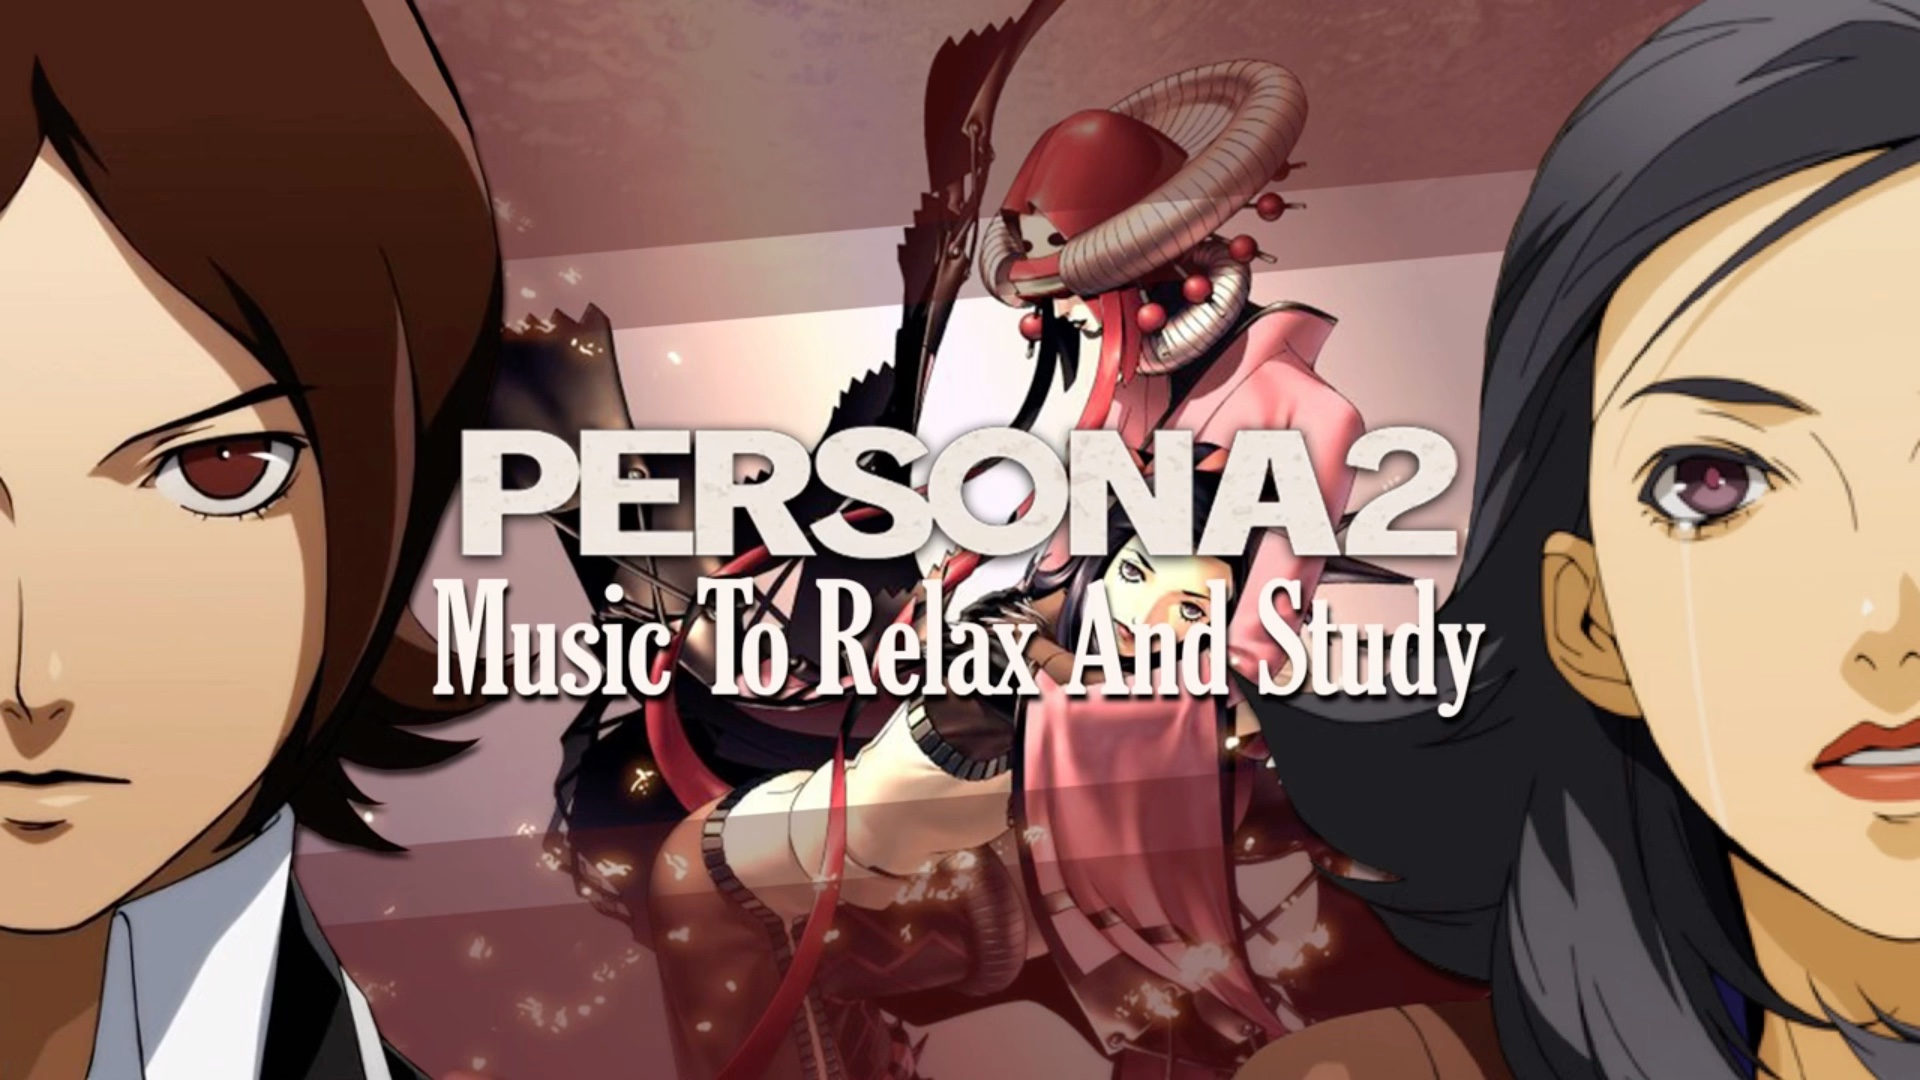 【STUDY WITH PERSONA 2】和周防达哉/天野舞耶一起学习吧